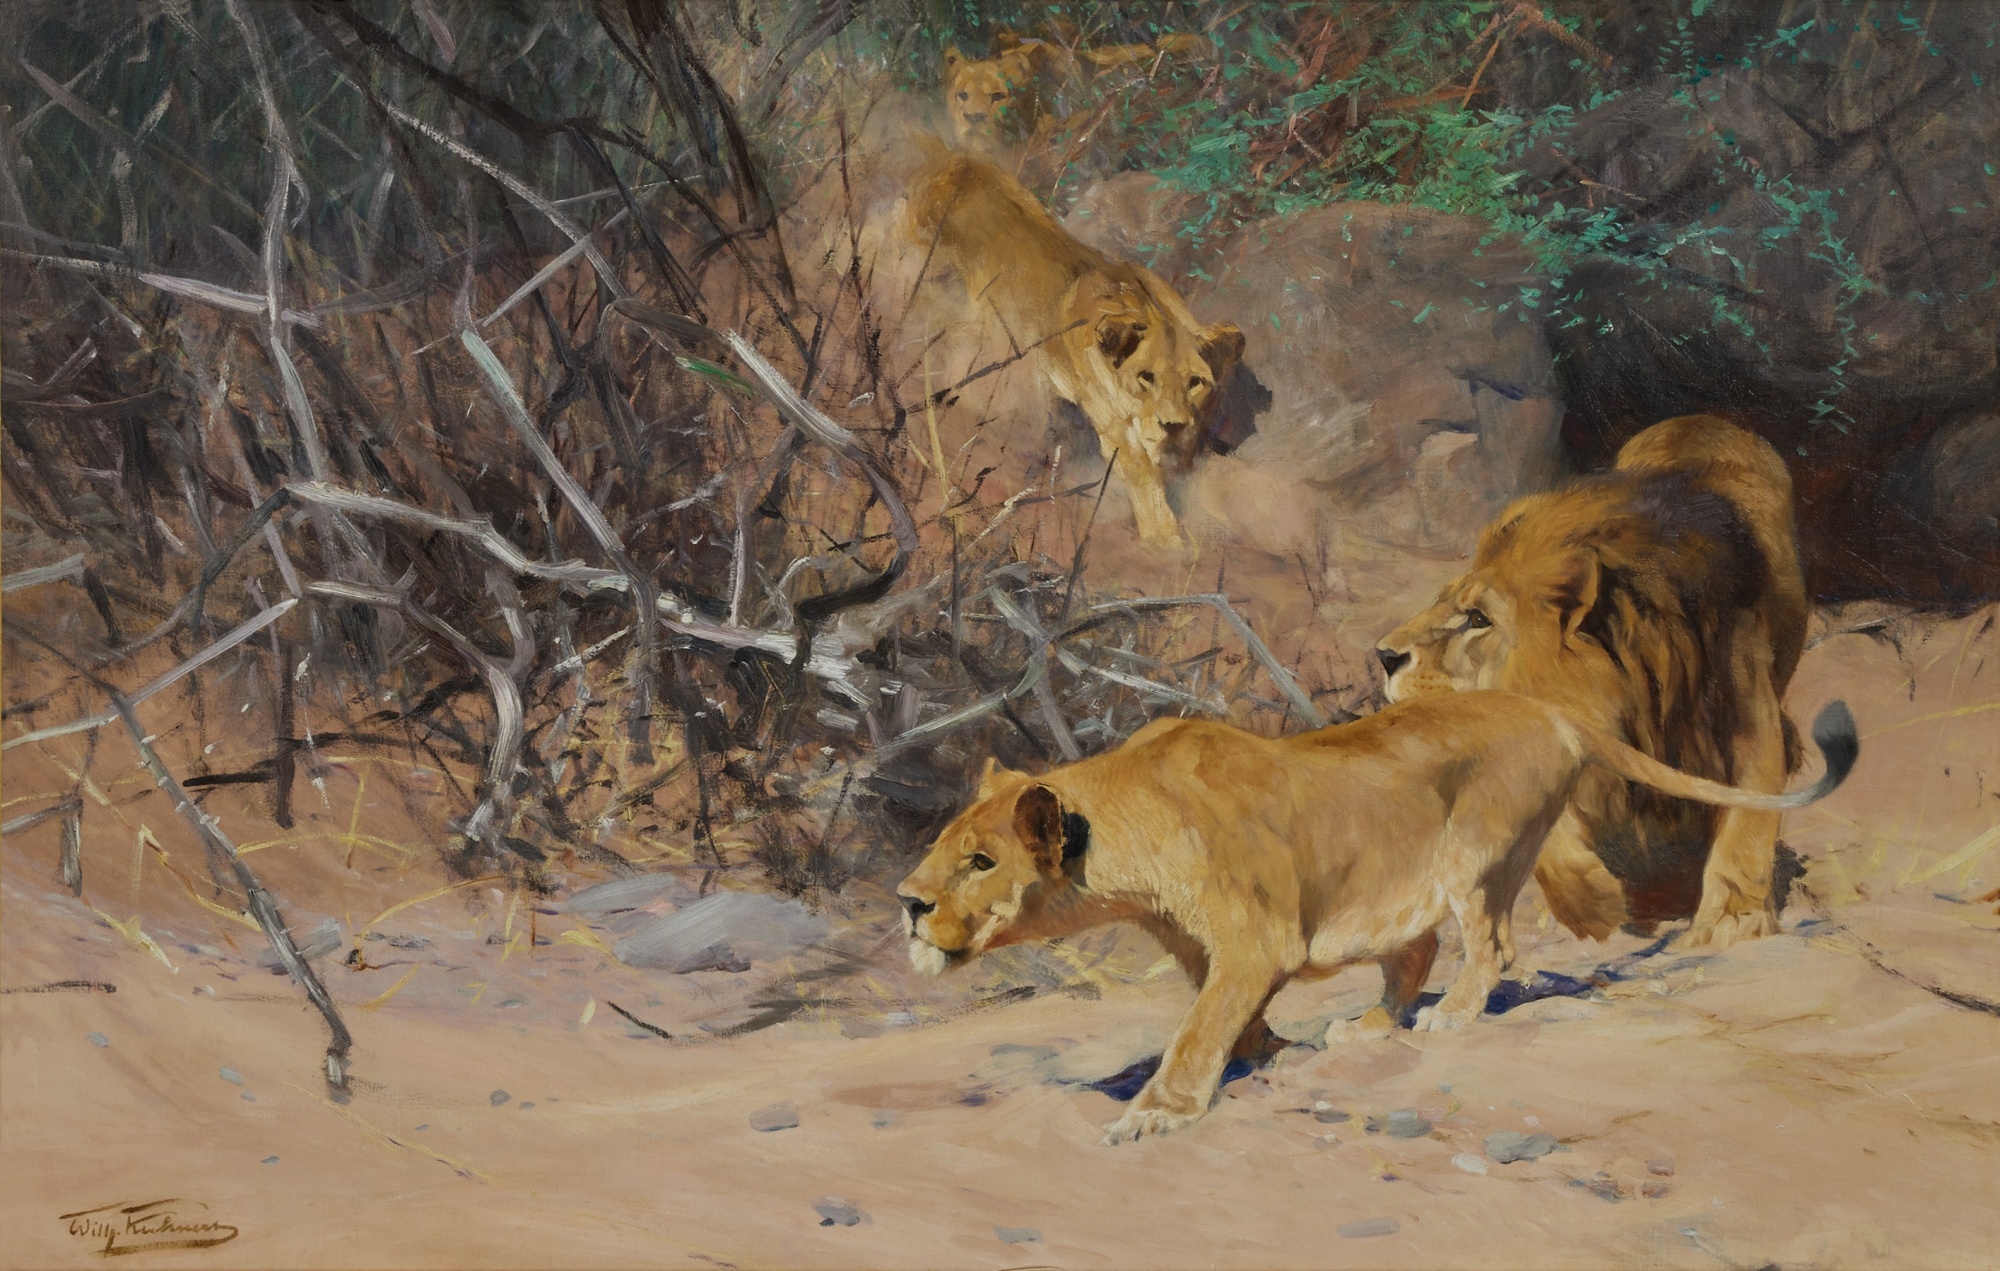 A Pride of Lions on the Prowl by Wilhelm Kuhnert